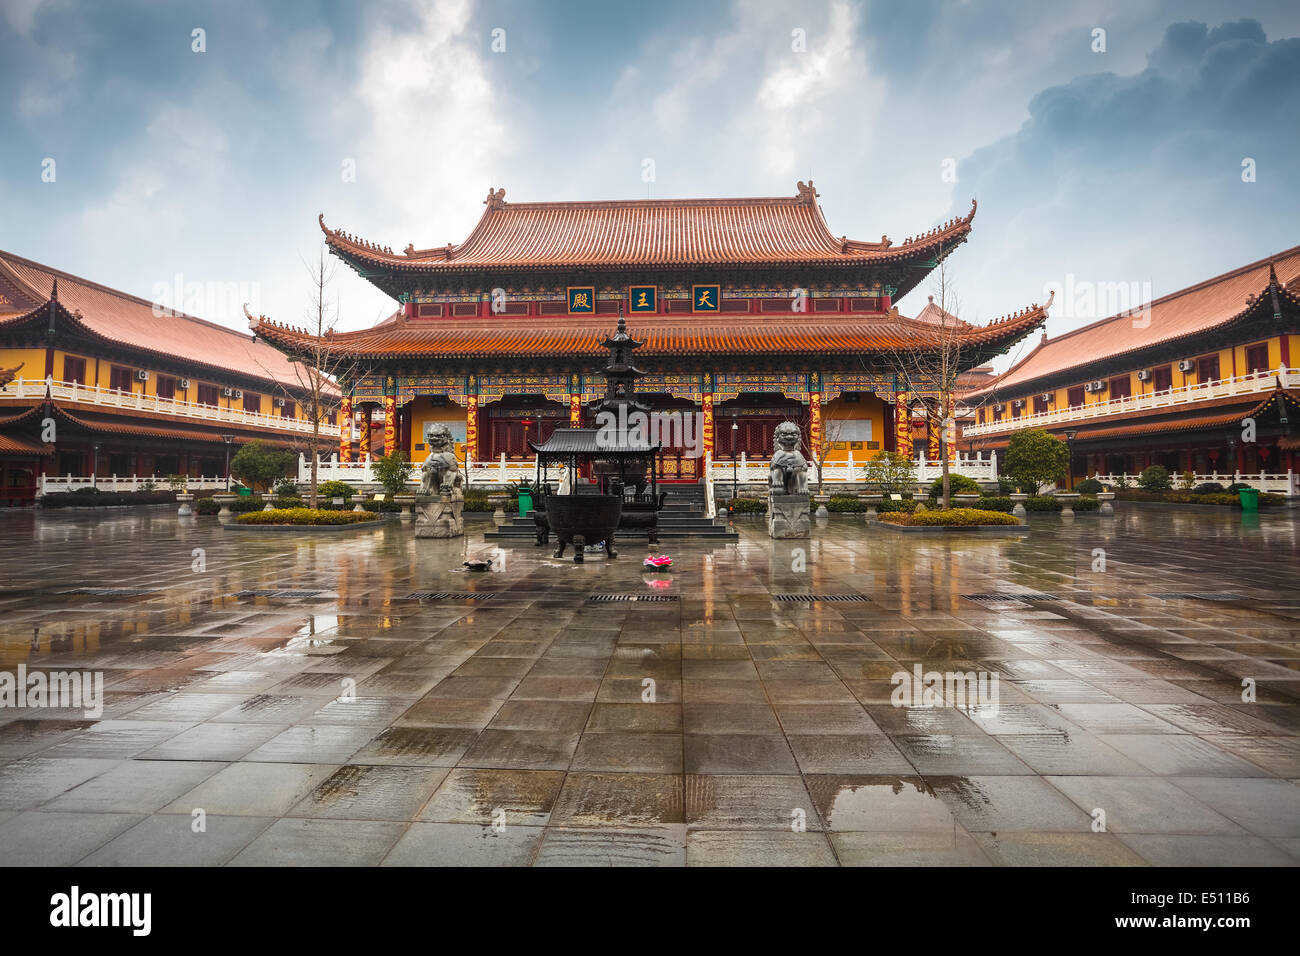 chinese temple building Stock Photo